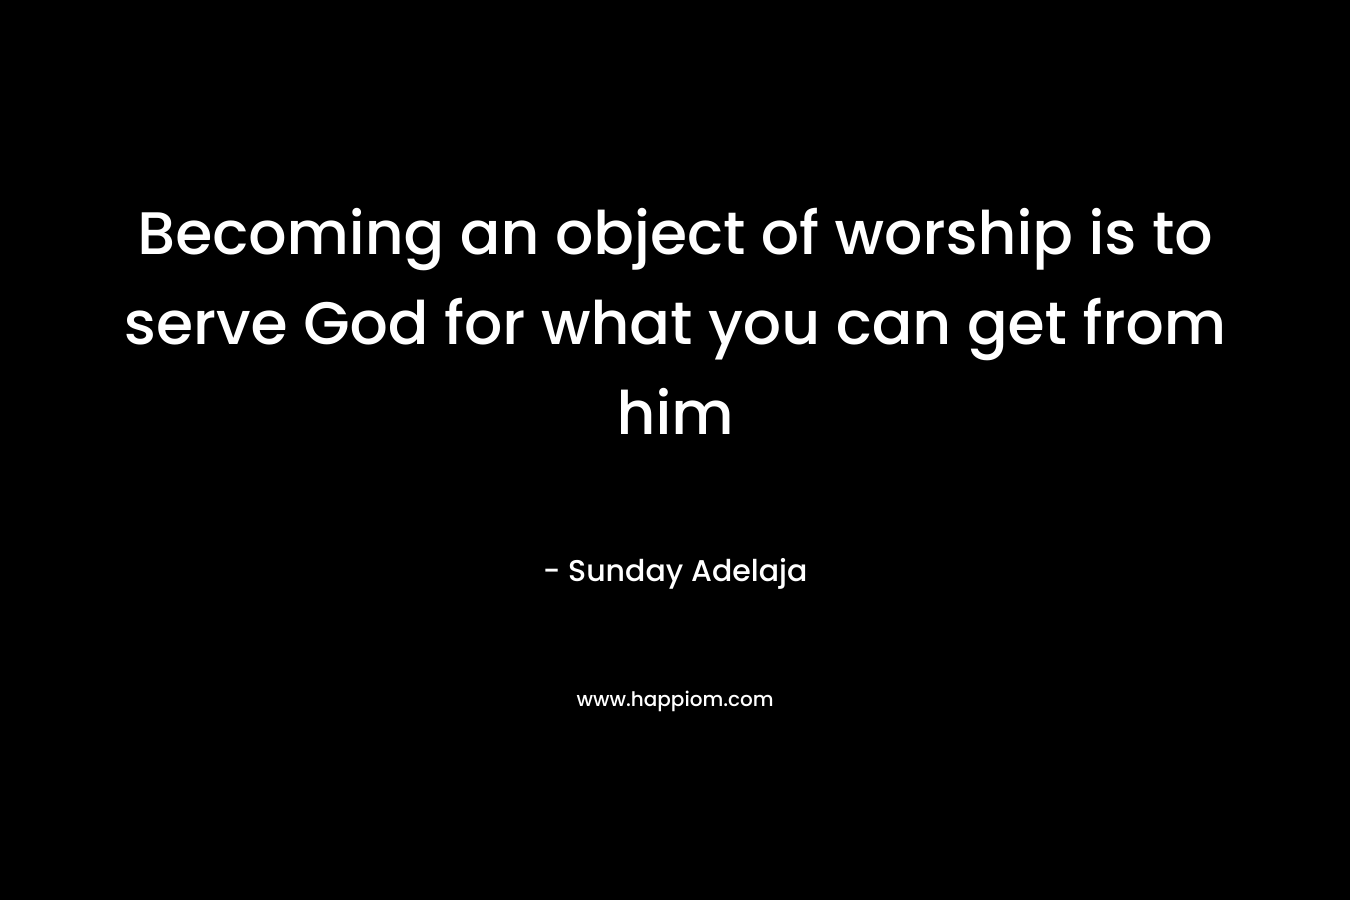 Becoming an object of worship is to serve God for what you can get from him – Sunday Adelaja